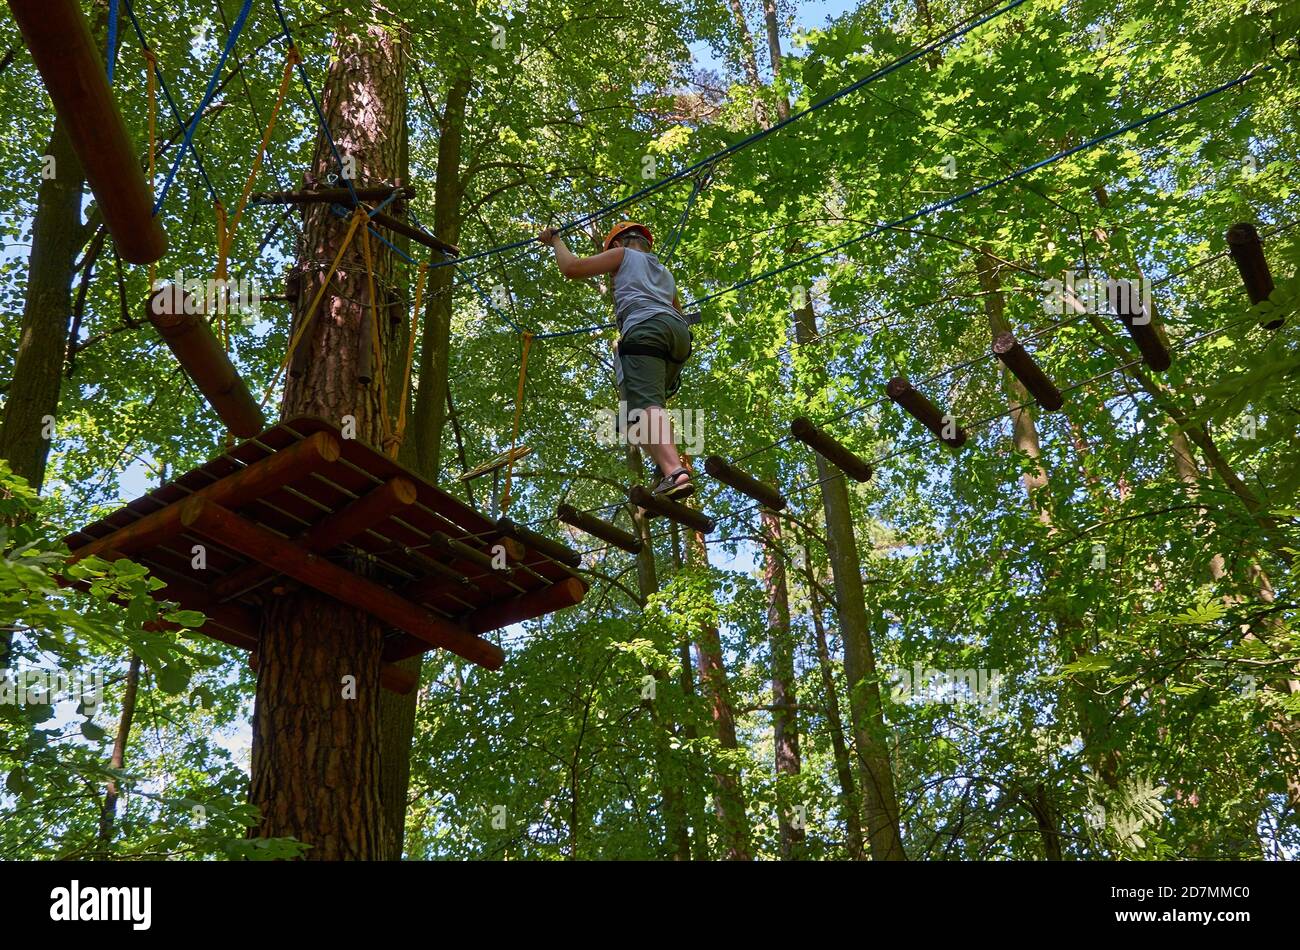 A boy with a helmet and insurance passes a high-altitude obstacle course. Workout Stock Photo